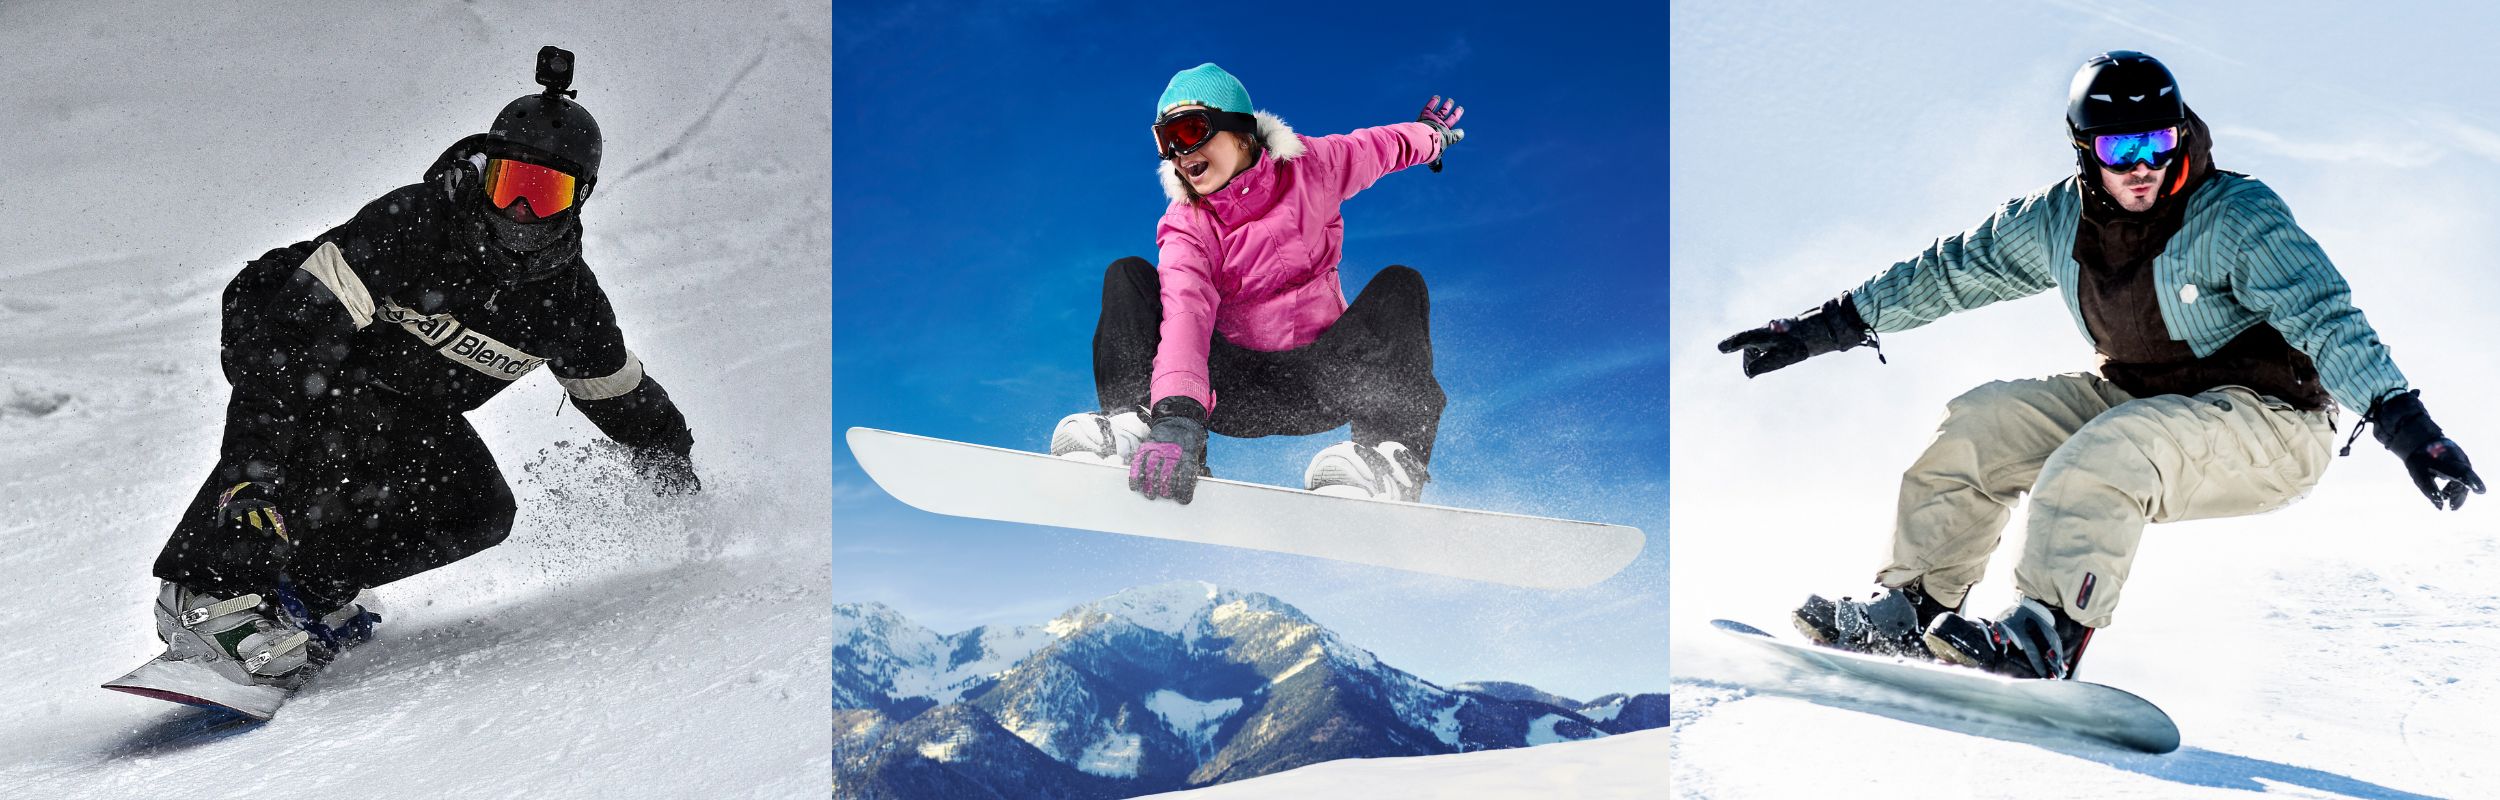 Https://alternativebrands.co.nz/glasses Online/snow And Ski/snow And Skii Glasses Goggles Product Page Banner Altb Nz